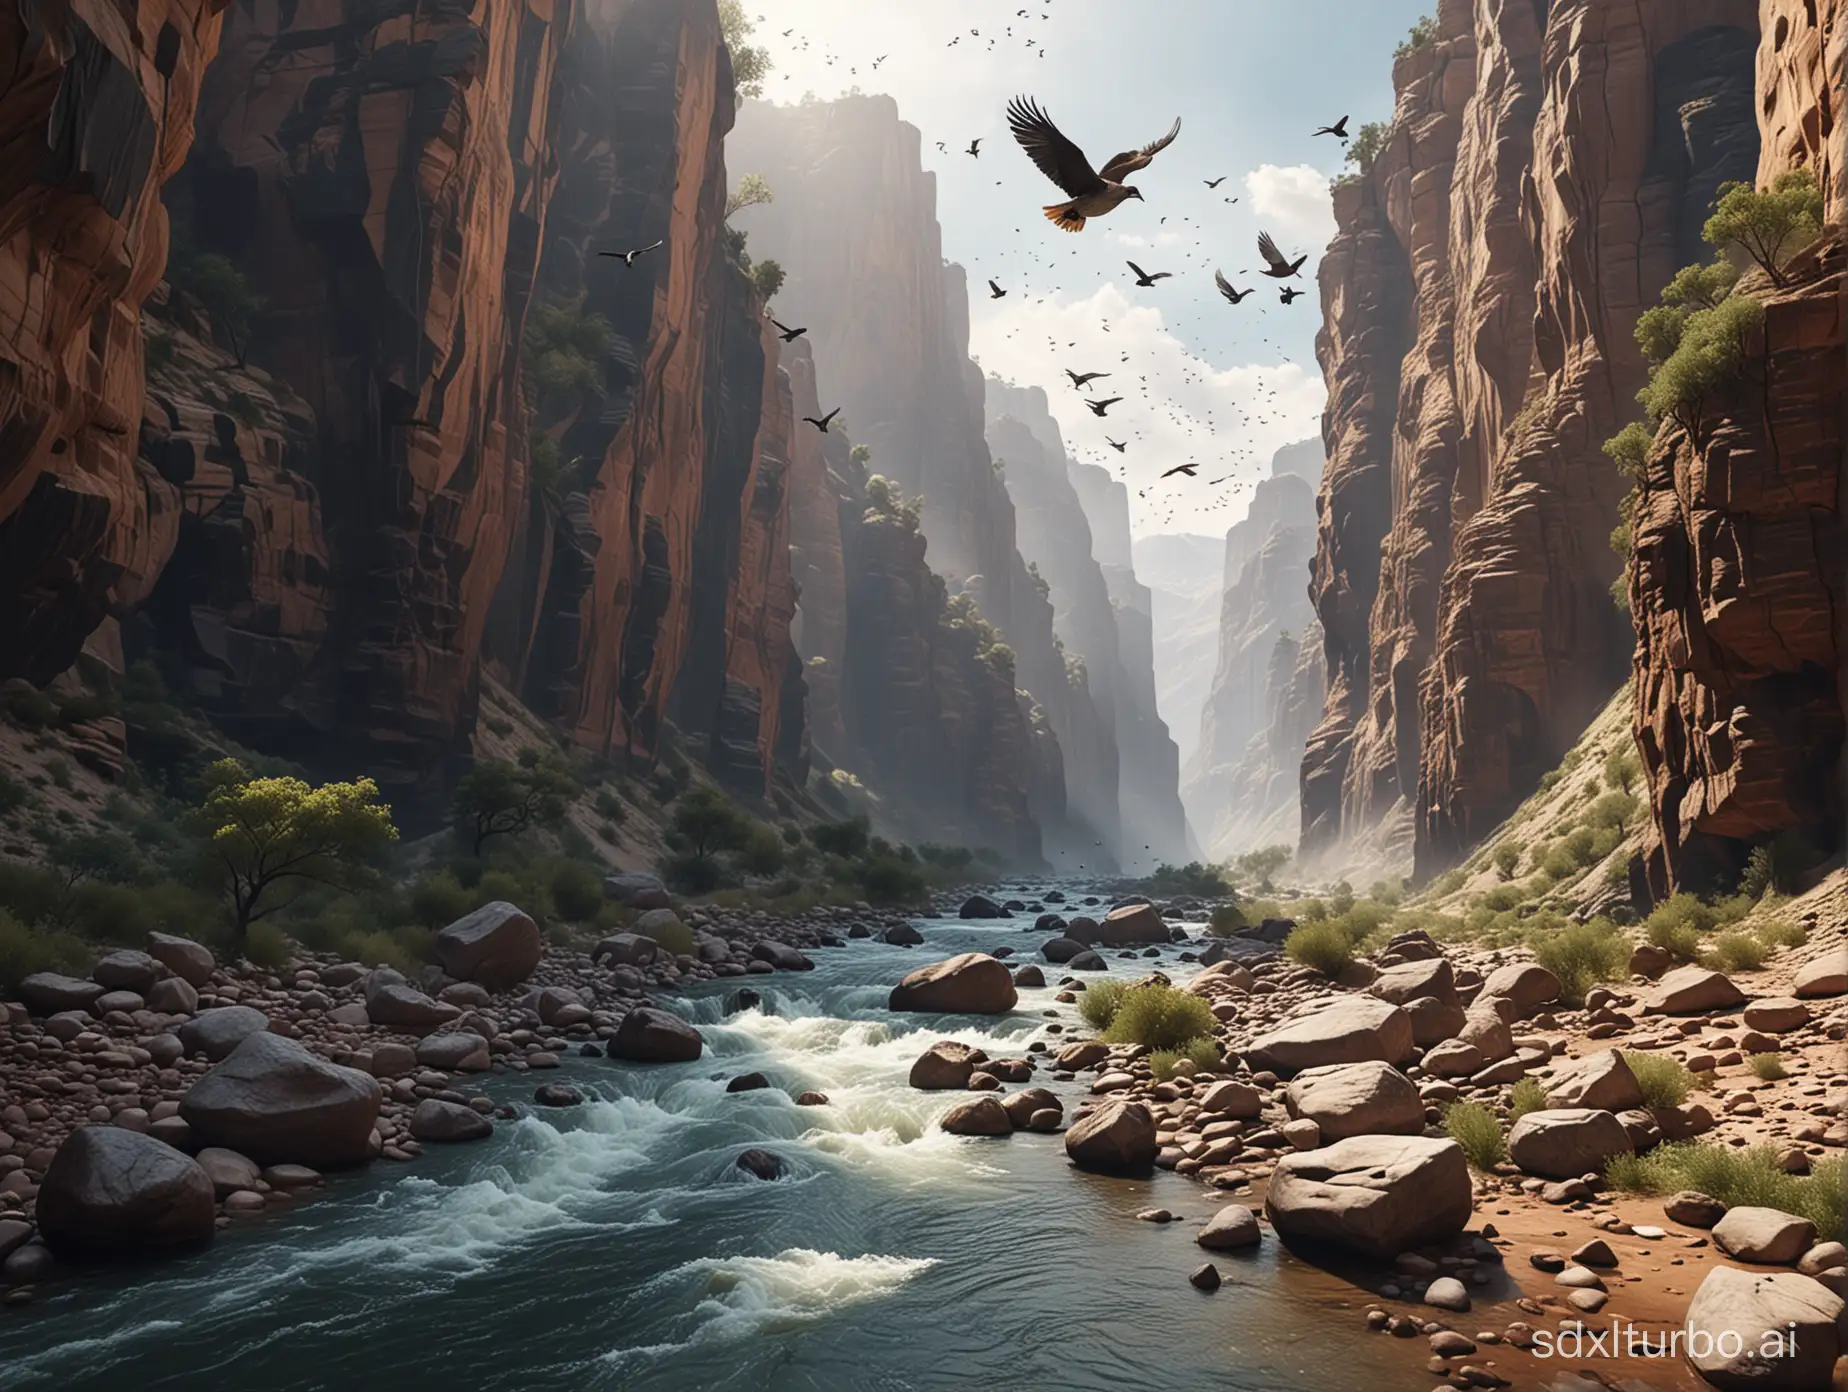 Majestic-Canyon-Landscape-with-Rushing-River-and-Soaring-Birds